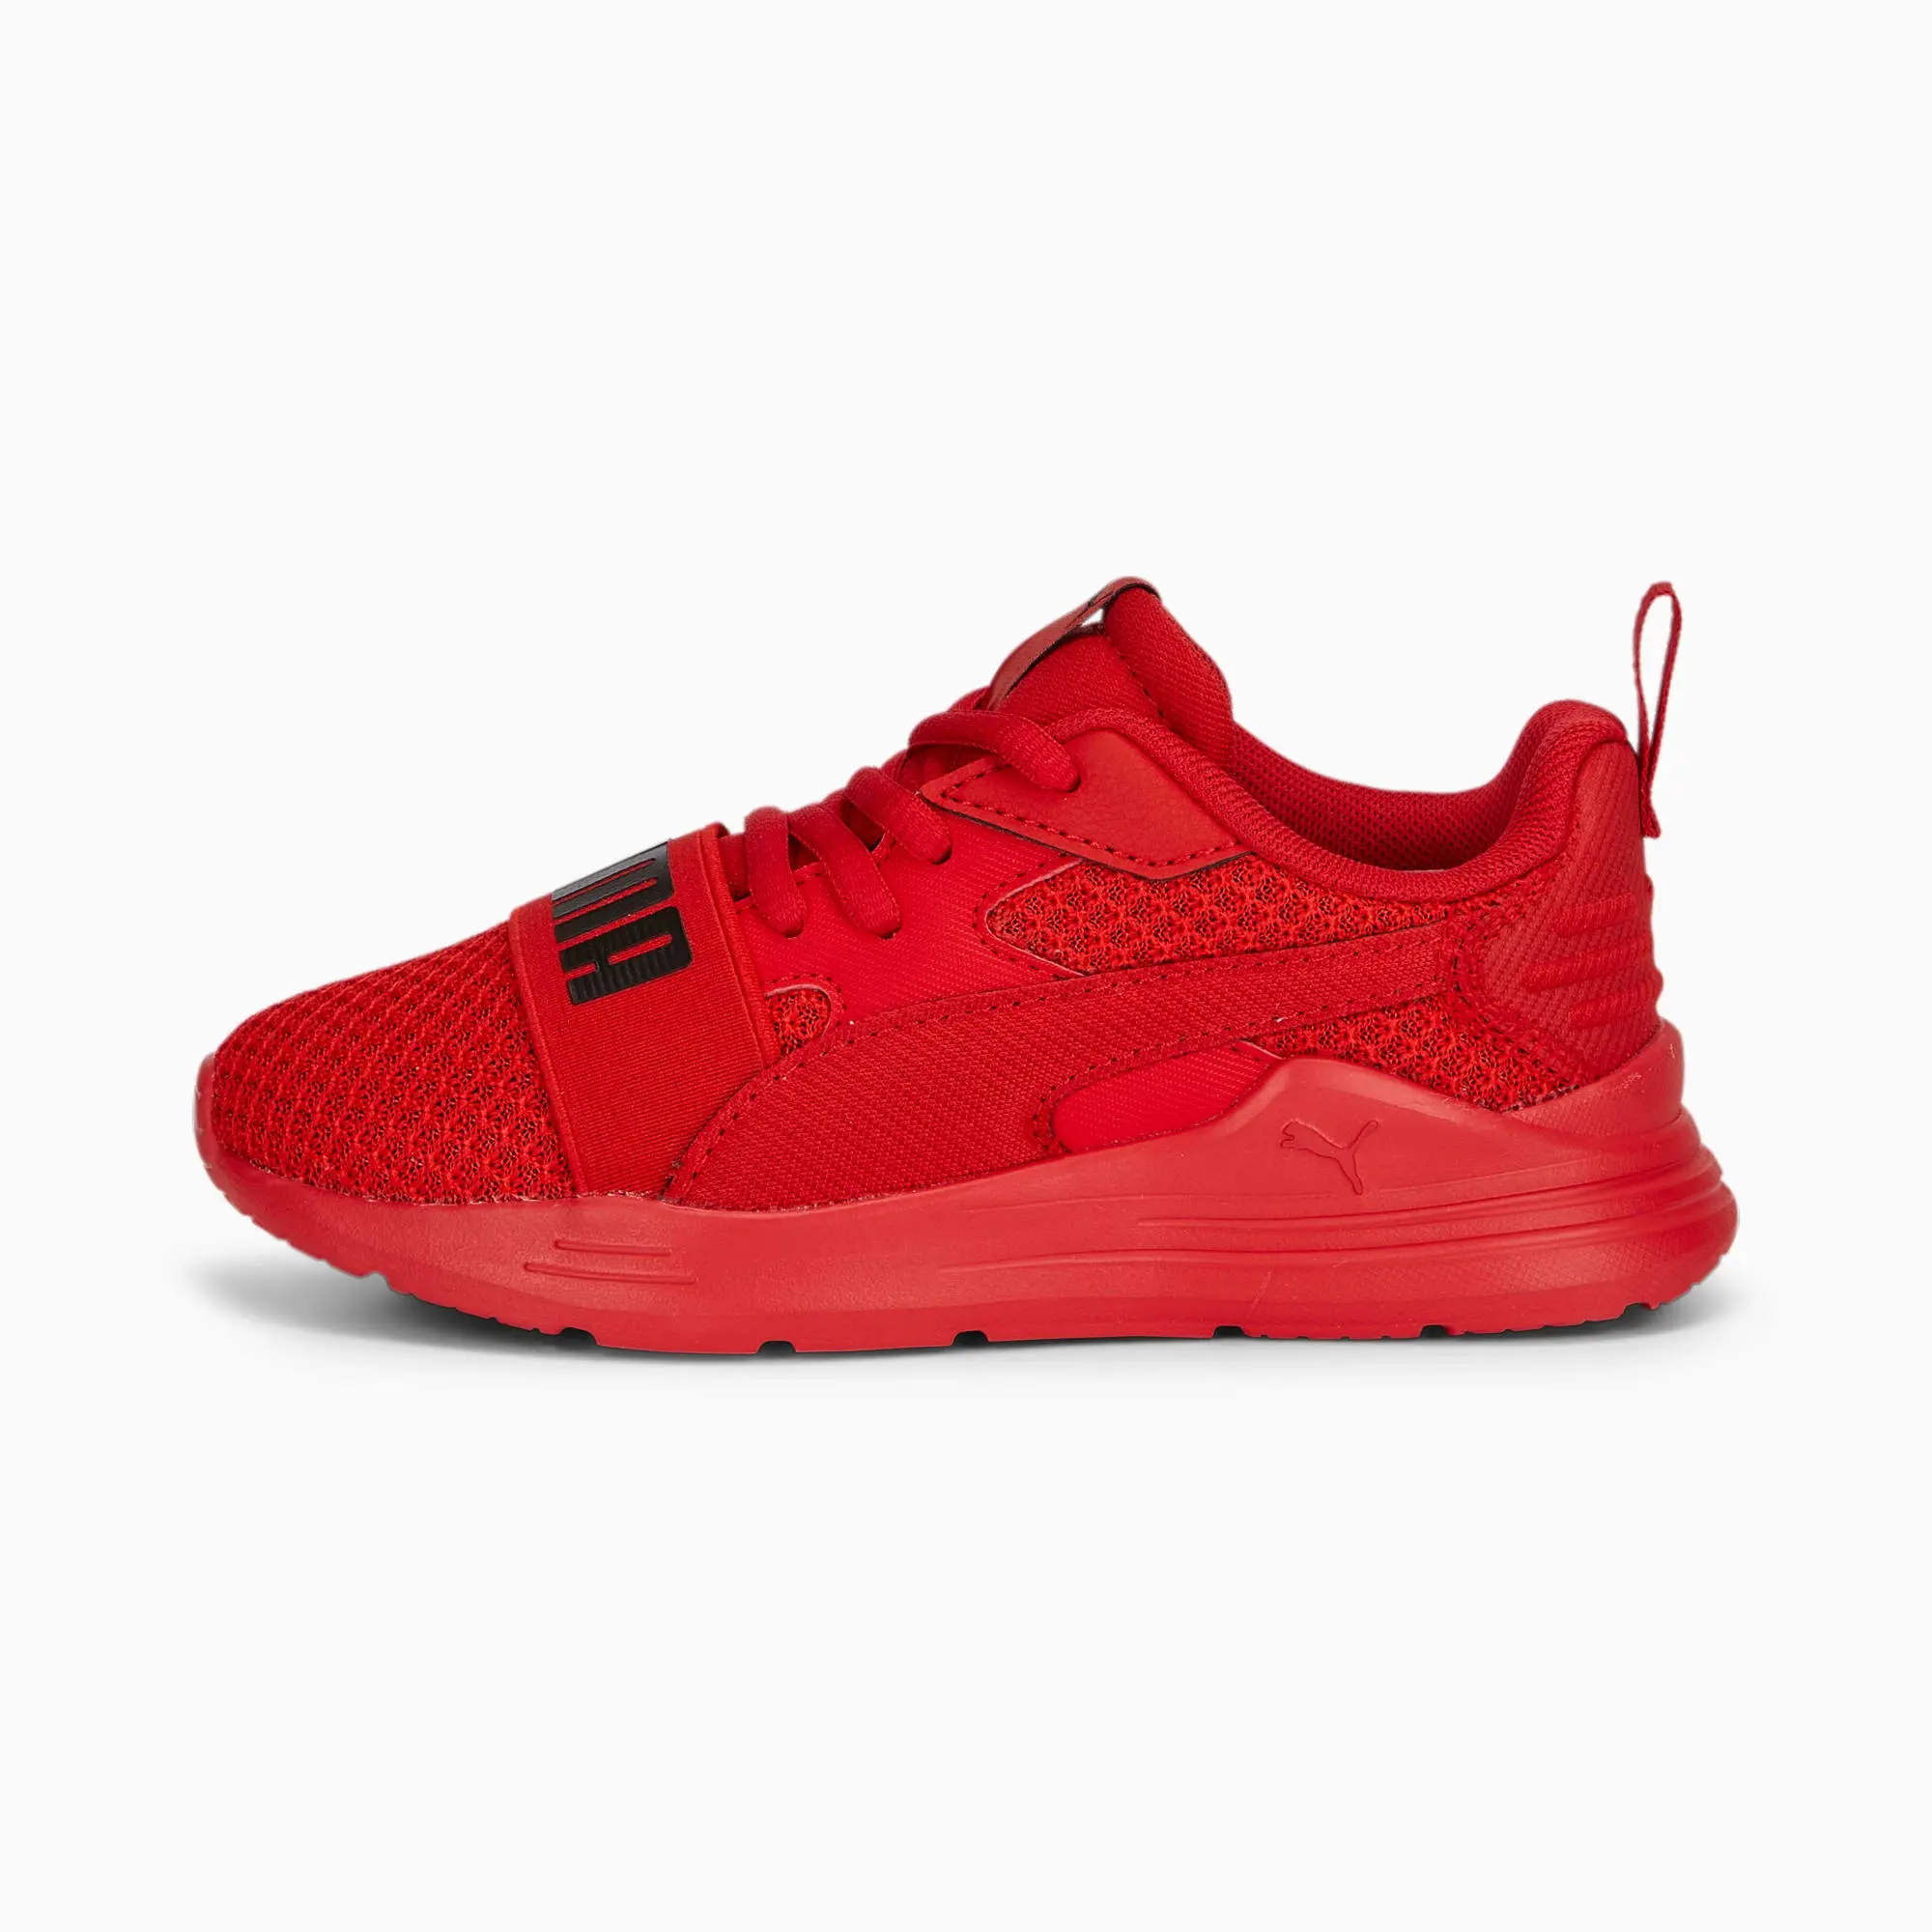 Puma Childrens Unisex Wired Run Pure Shoes - Red